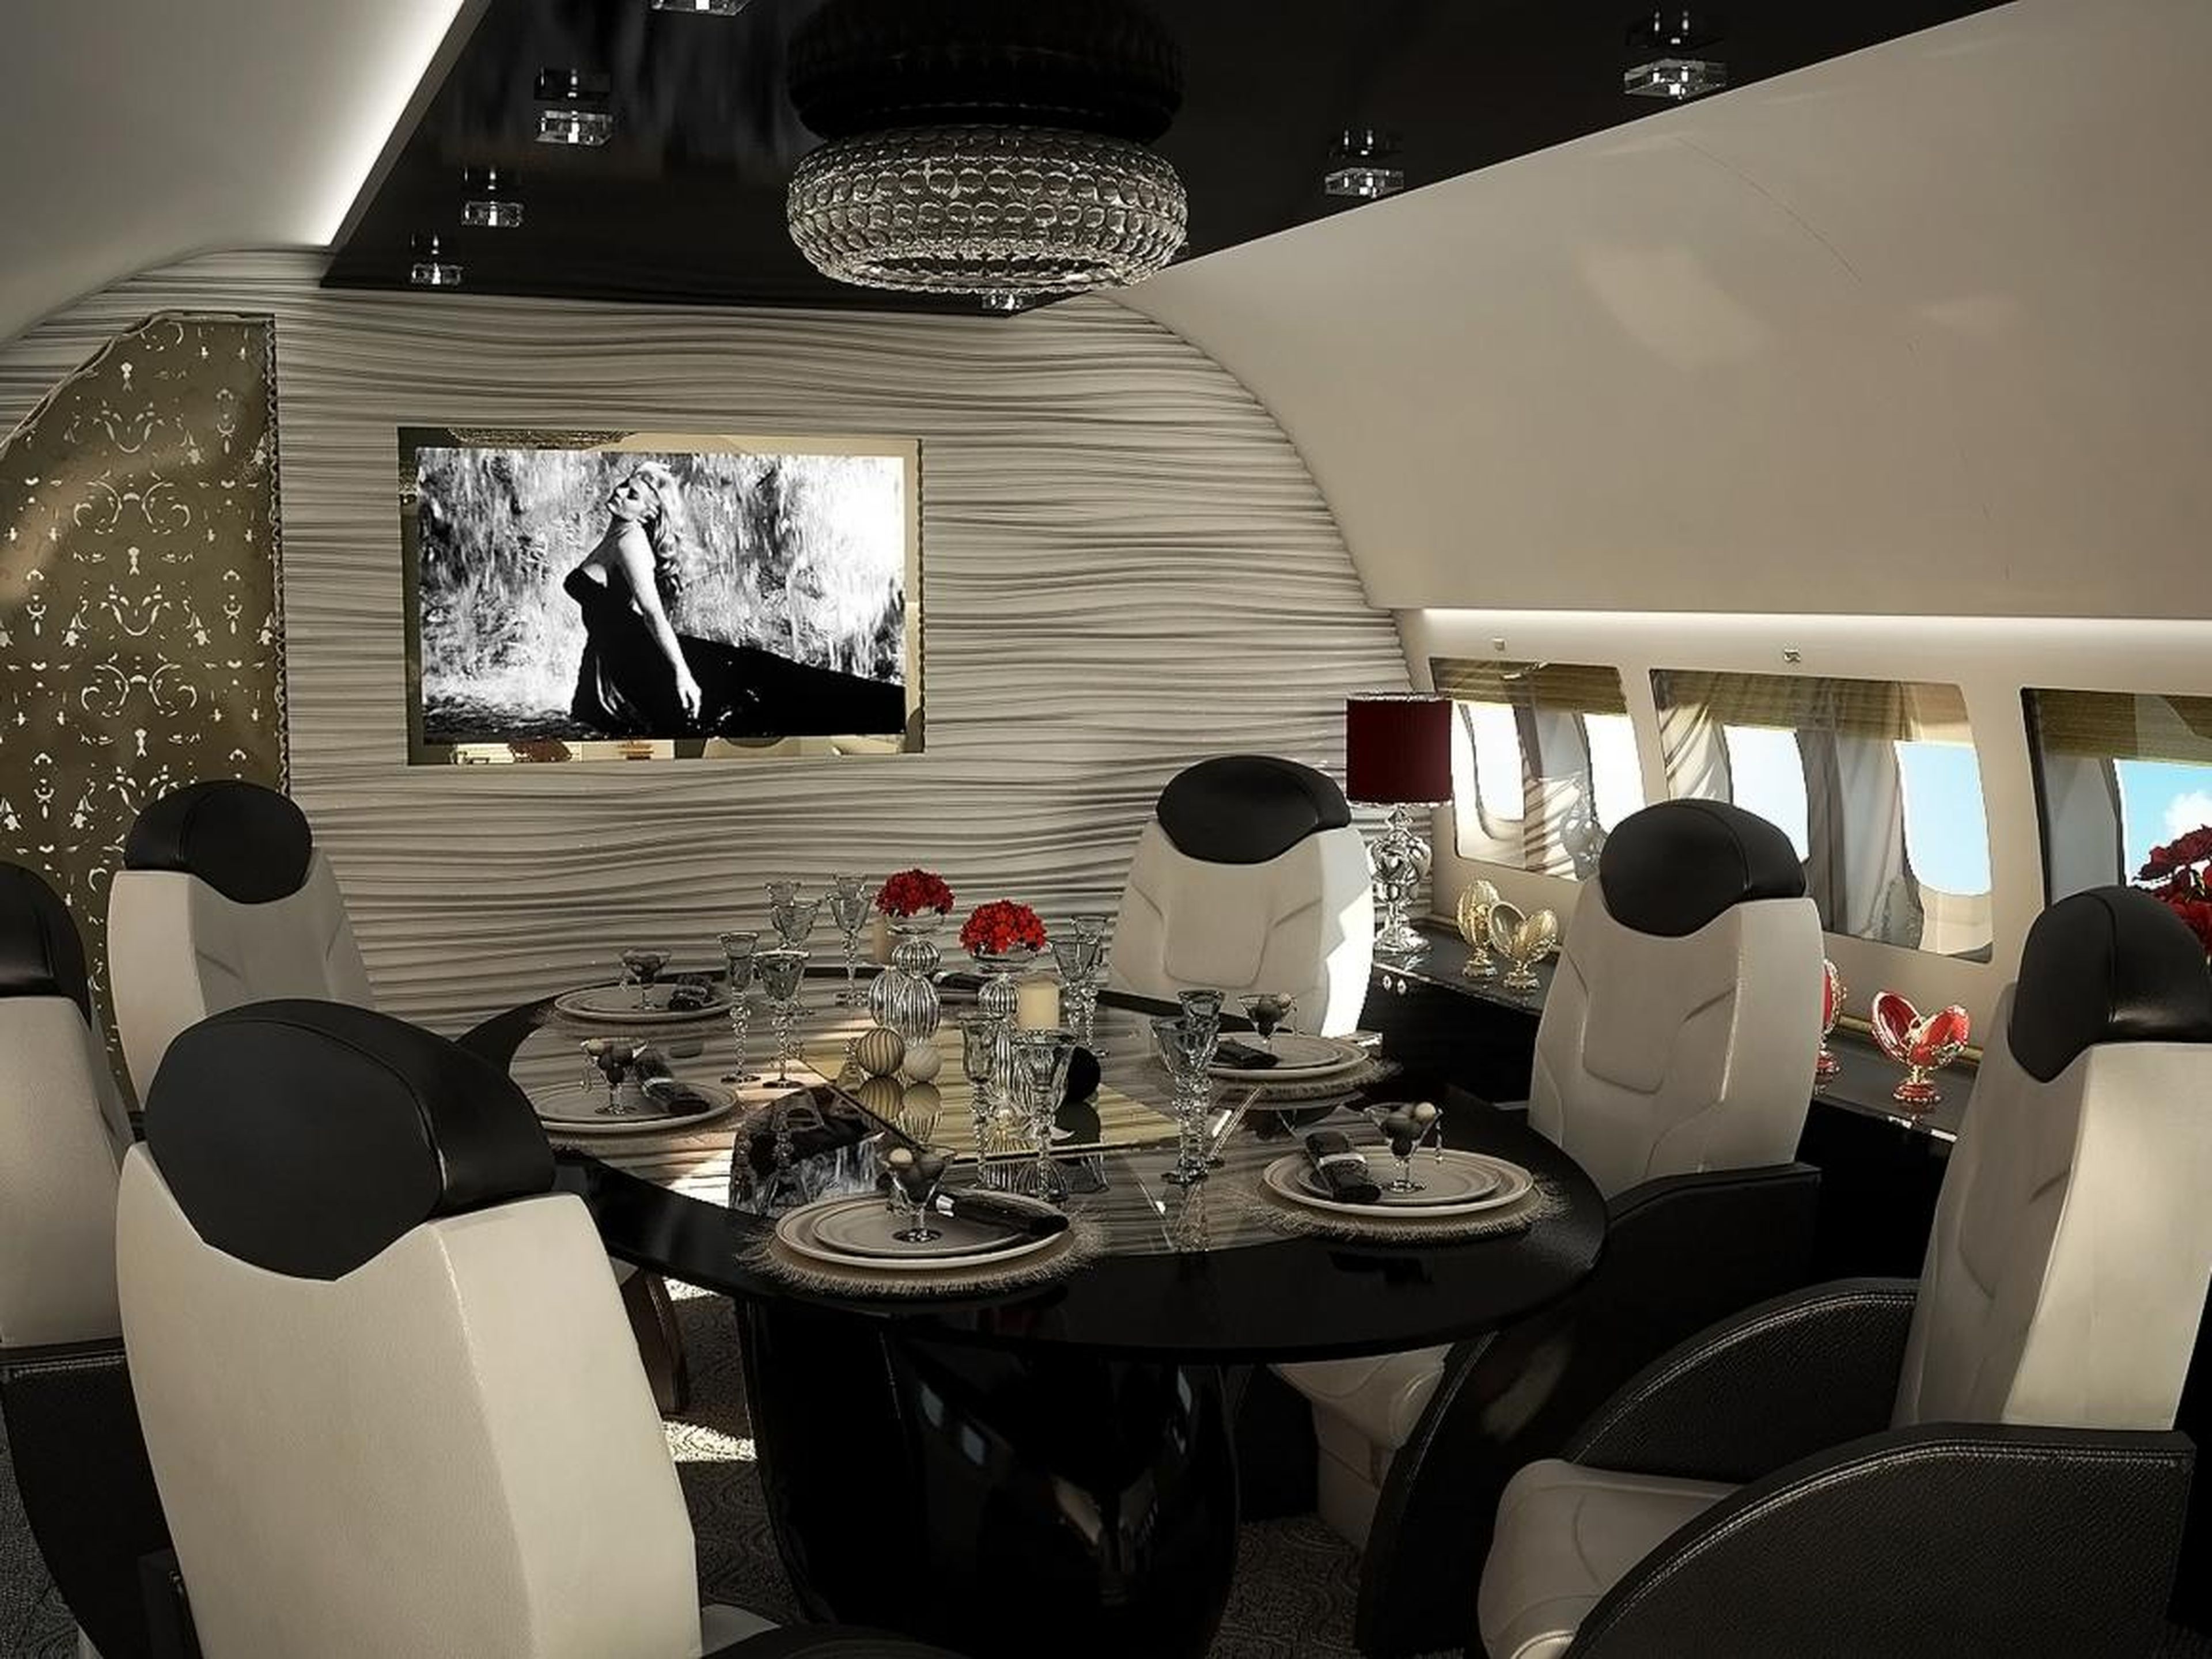 A rendering of a private jet's dining and meeting room designed by Airjet Designs.